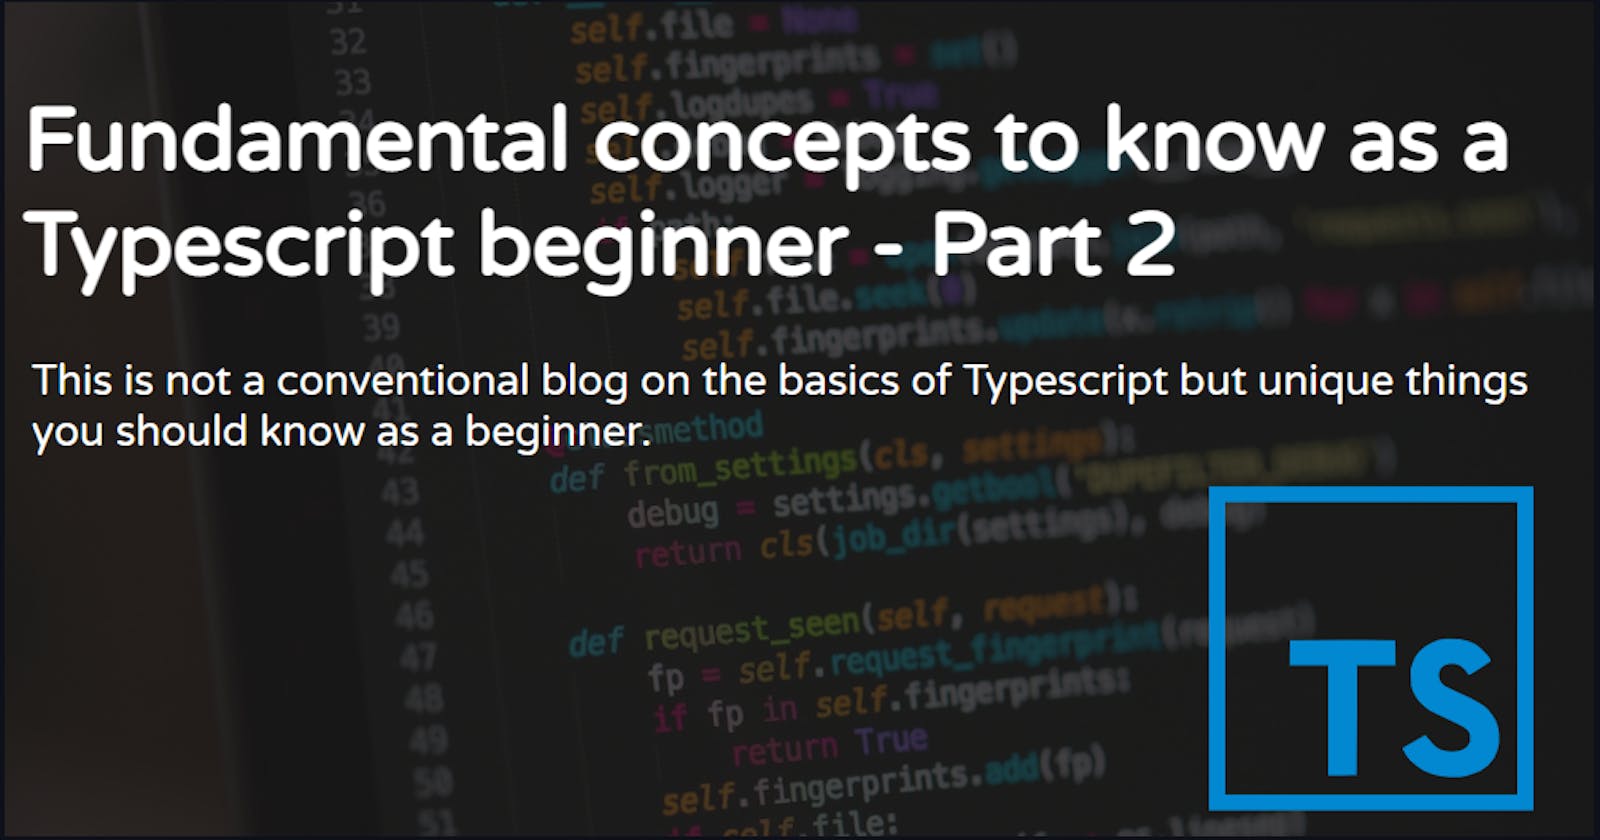 Fundamental concepts to know as a Typescript beginner - Part 2